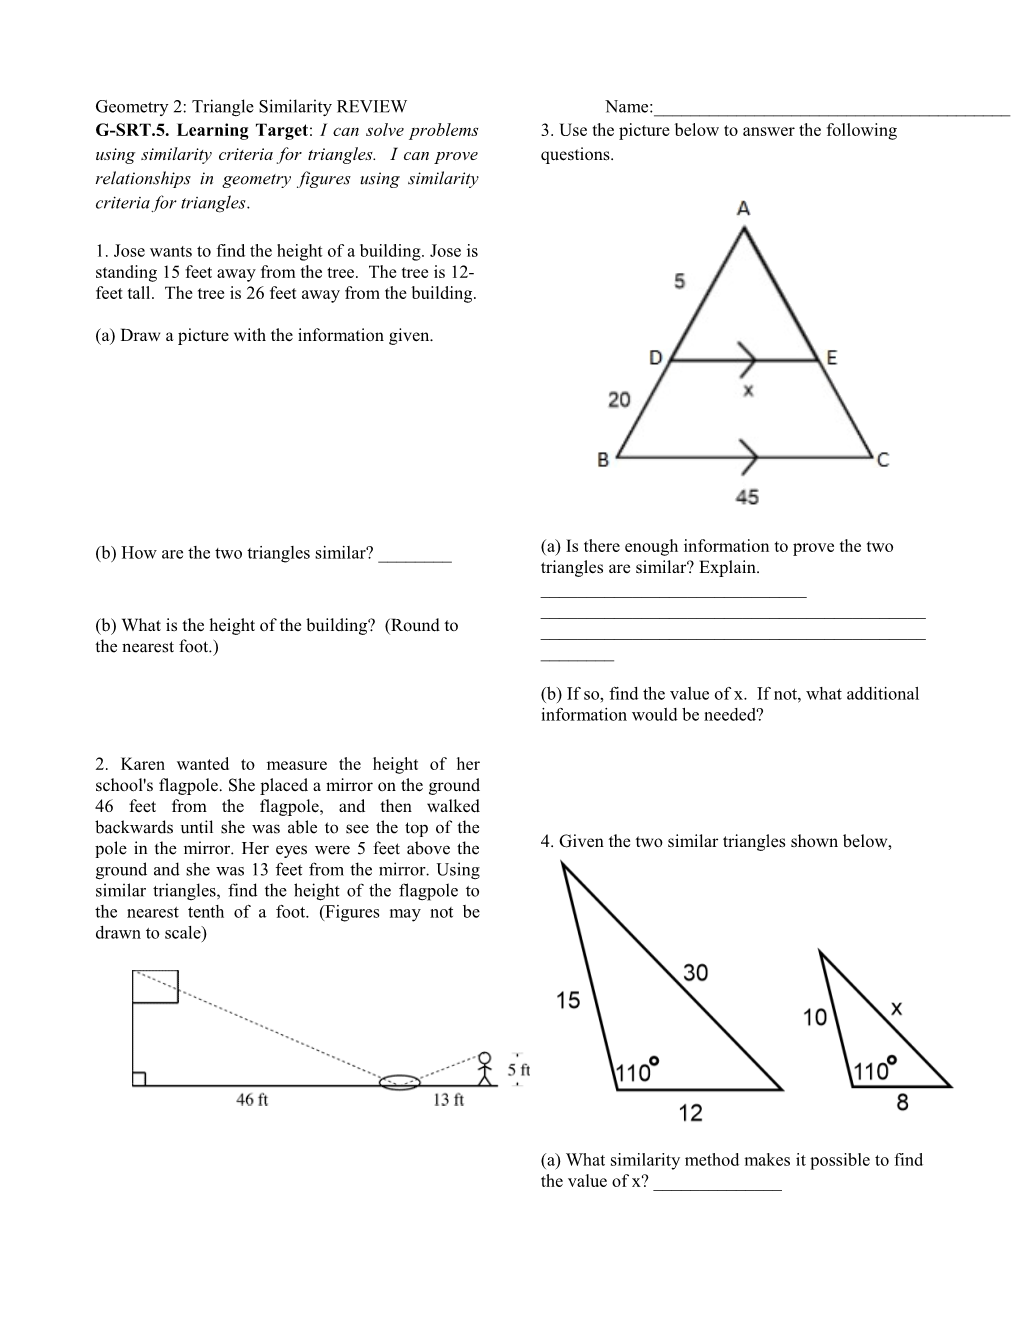 Geometry 2:Triangle Similarity Reviewname:______